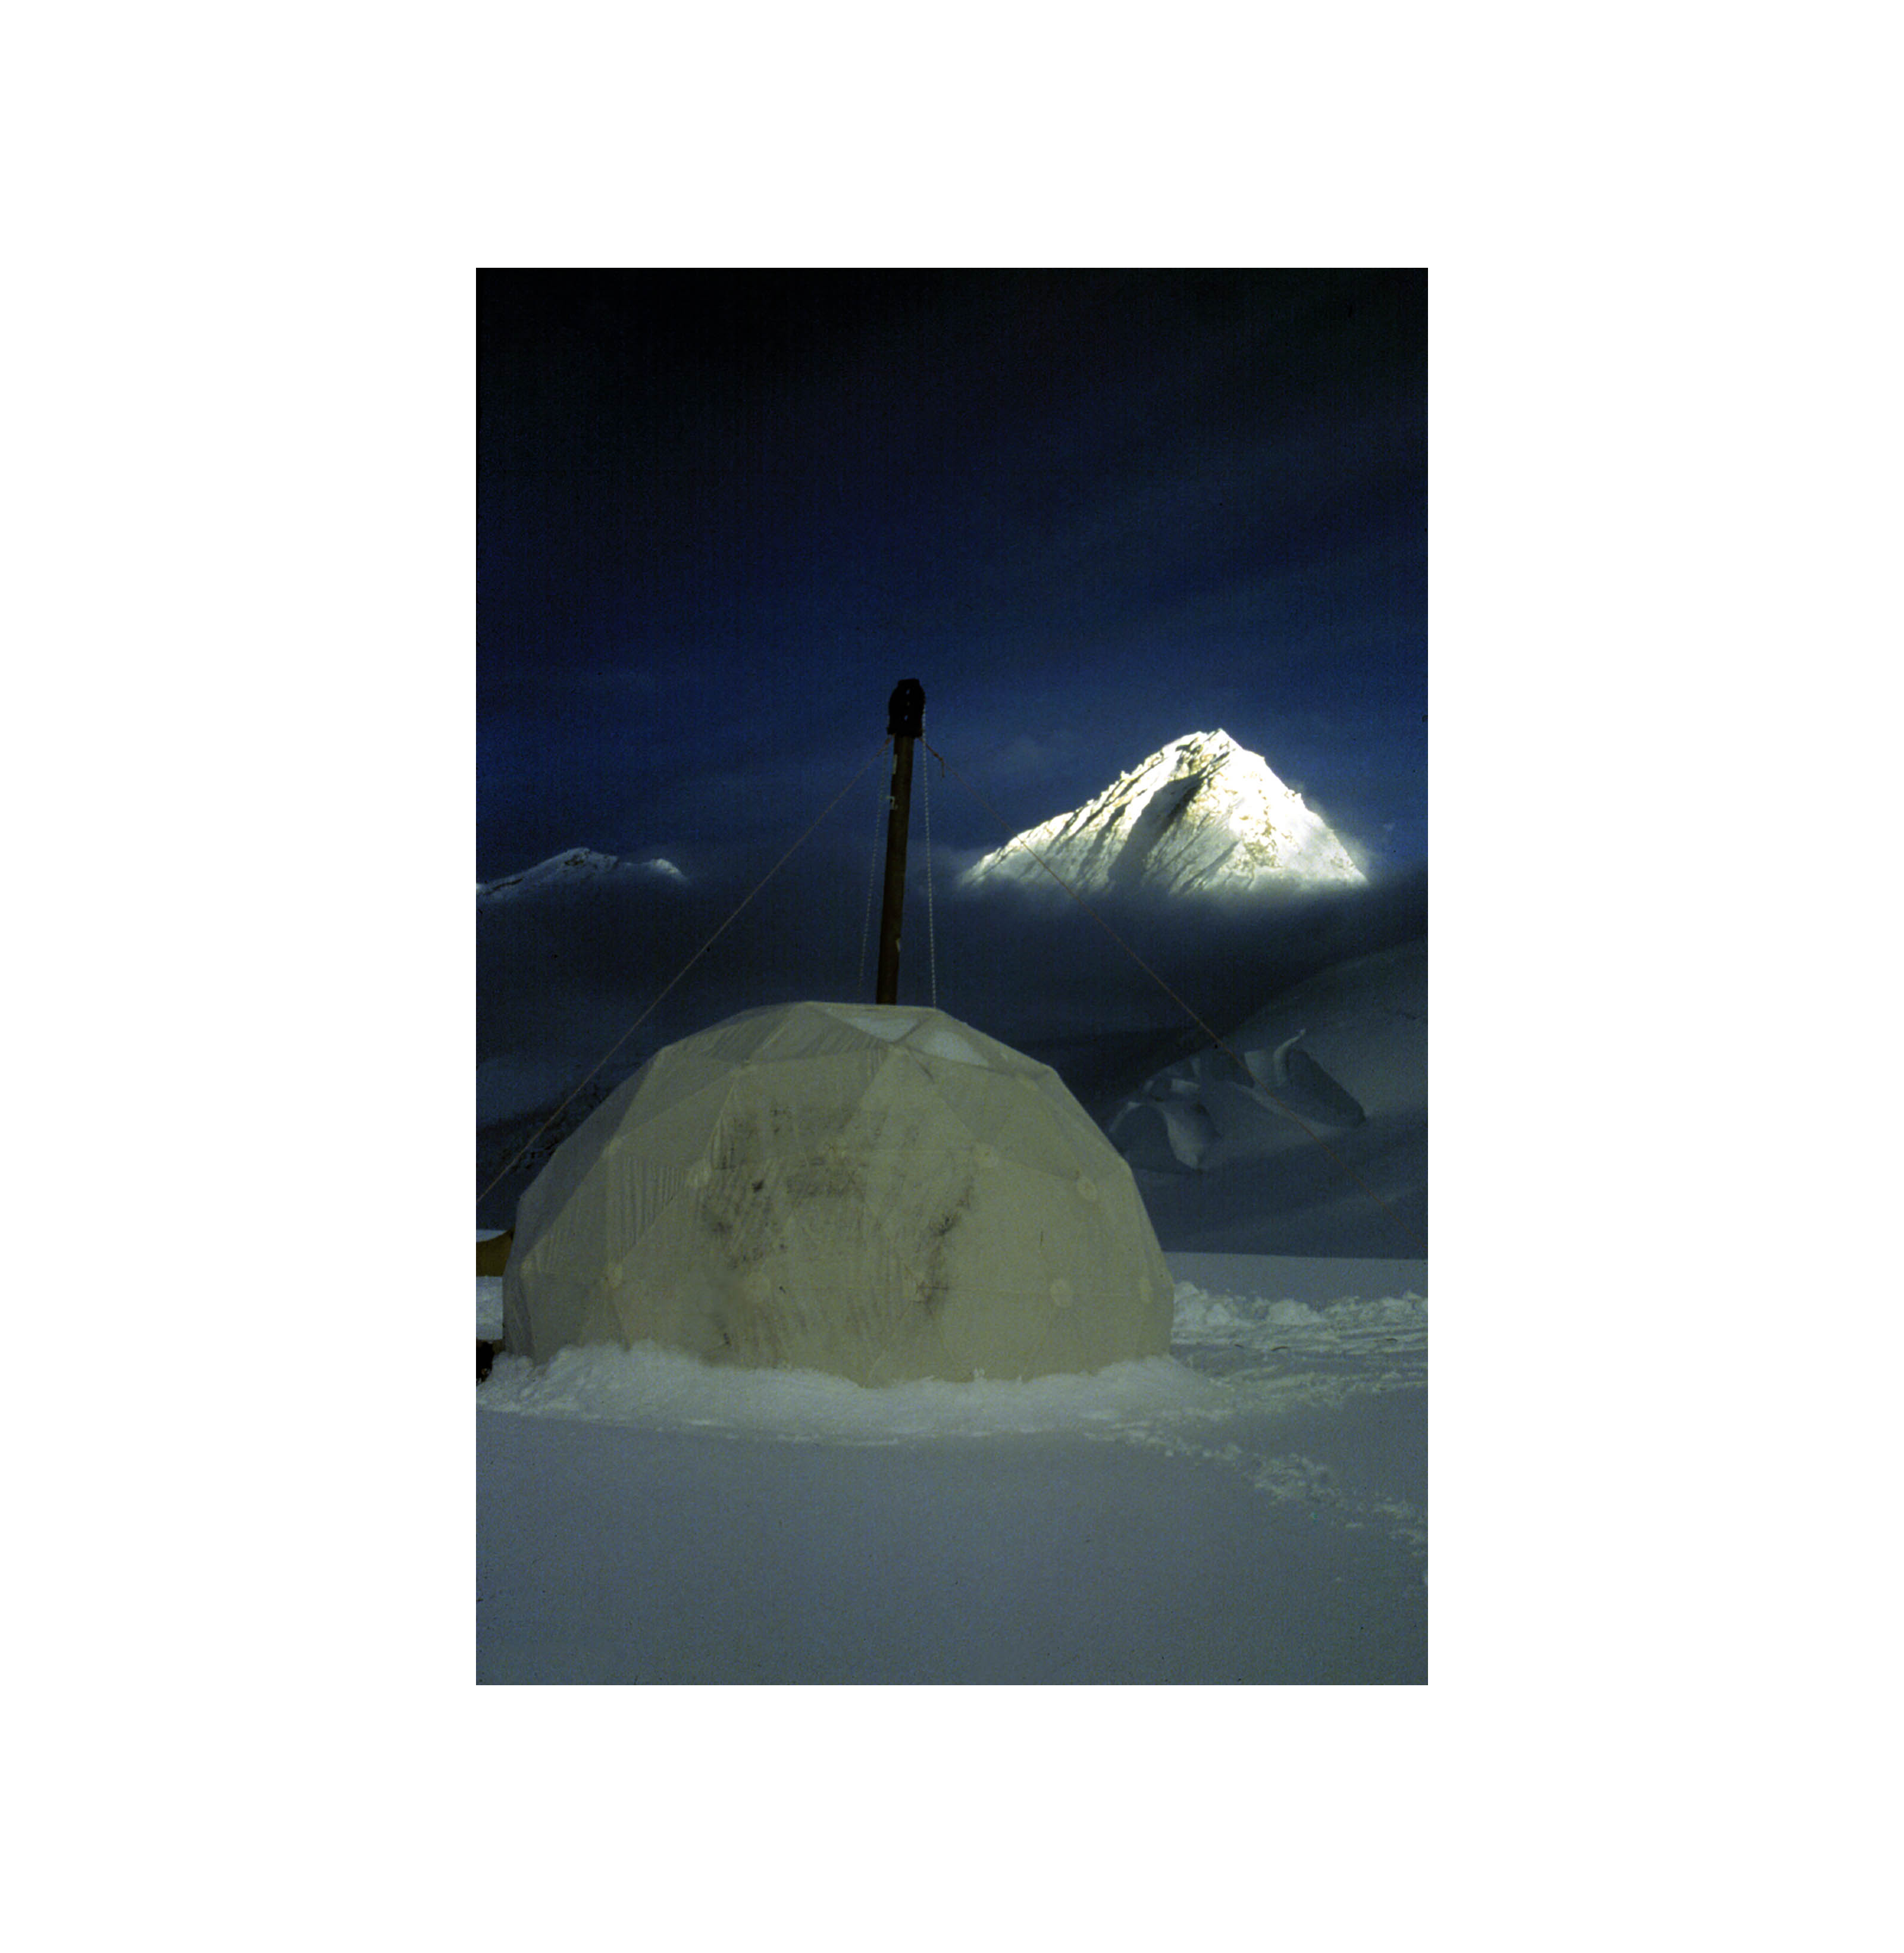  A white dome tent on the snowy ground and a white snow capped mountain at a distance under dark blue skies.